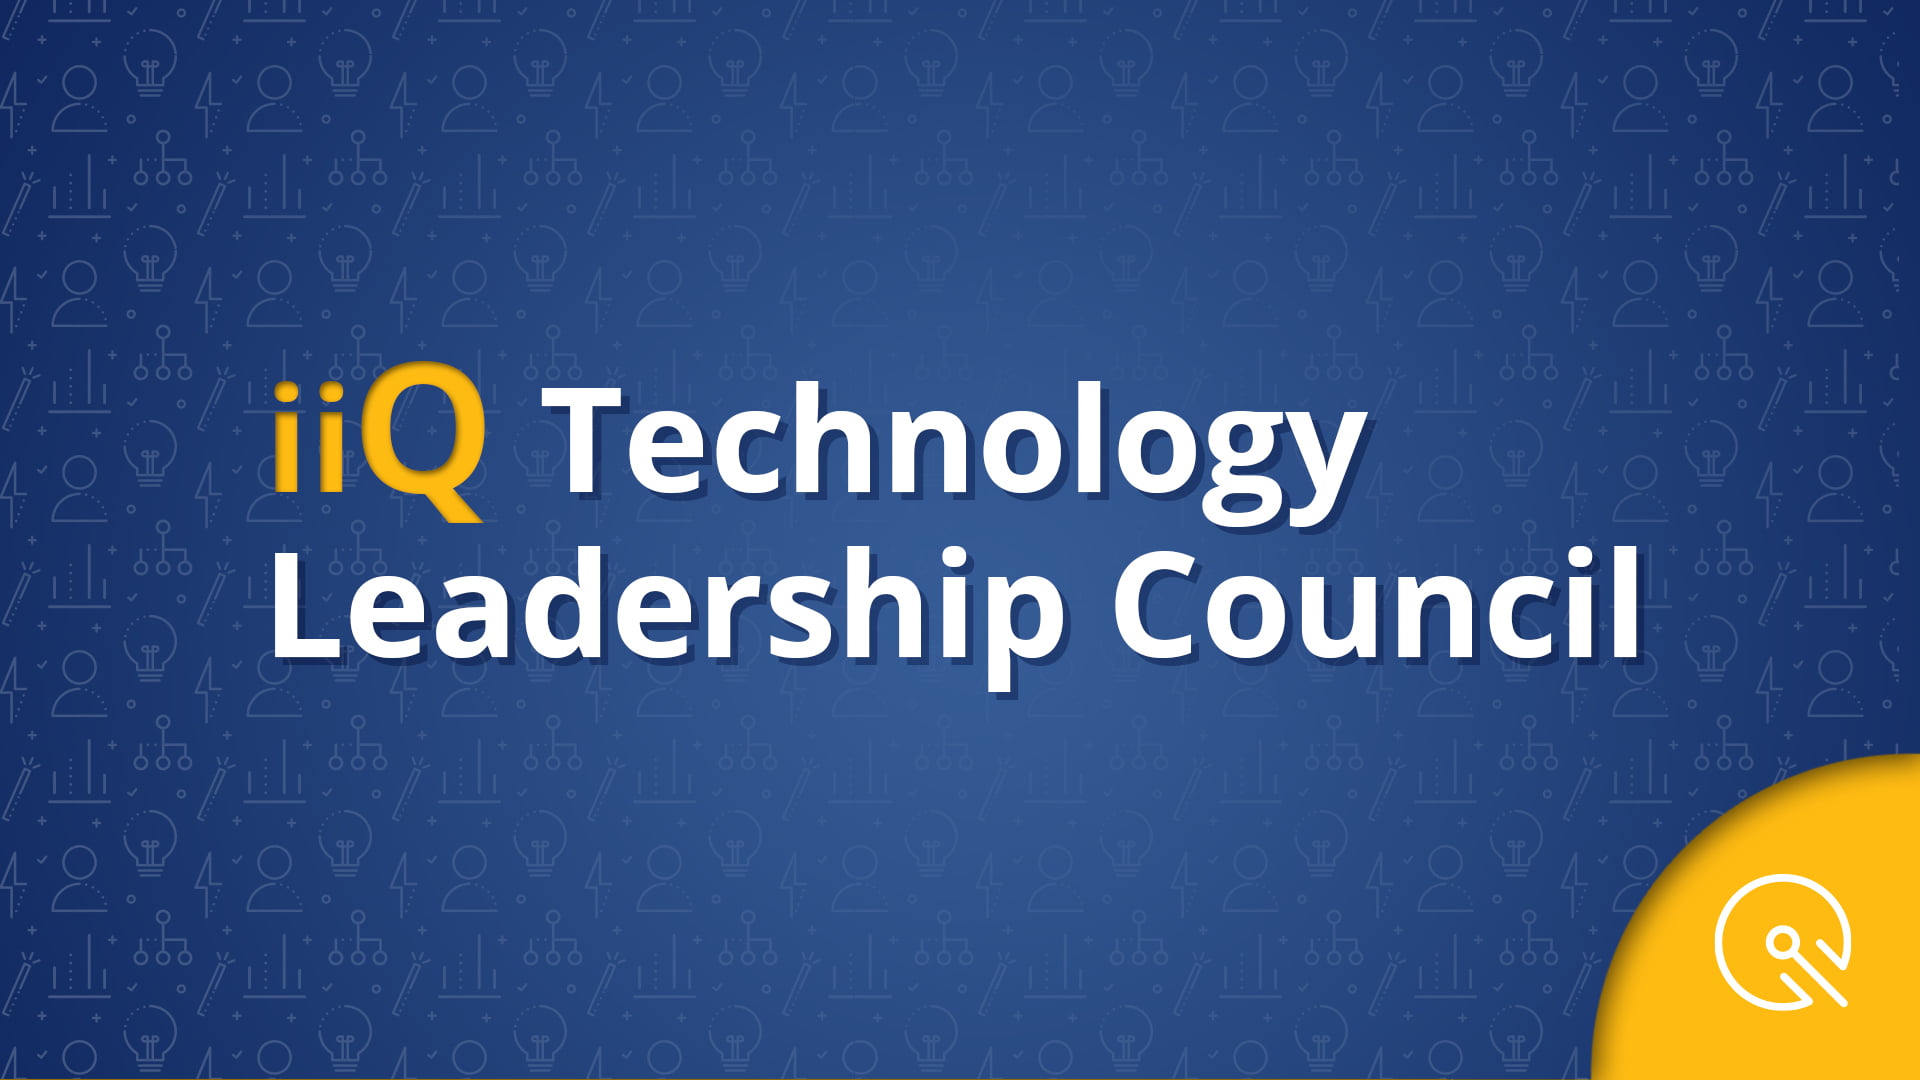 Incident IQ Forms iiQ Technology Leadership Council to Accelerate Innovation in K-12 Service Management